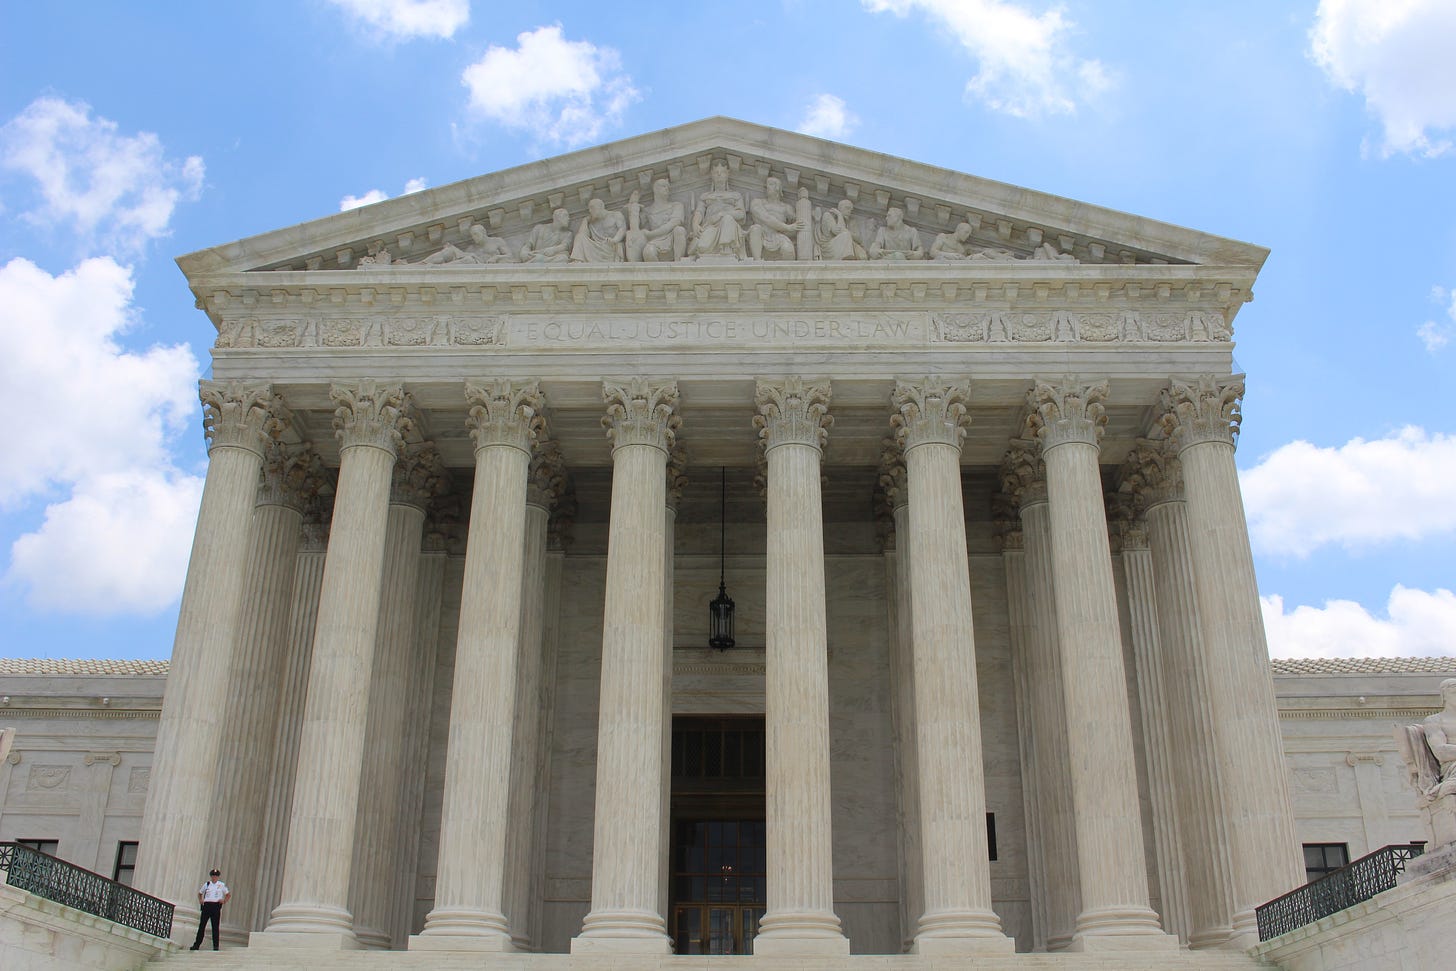 A photo of the outside of the U.S. Supreme Court building.